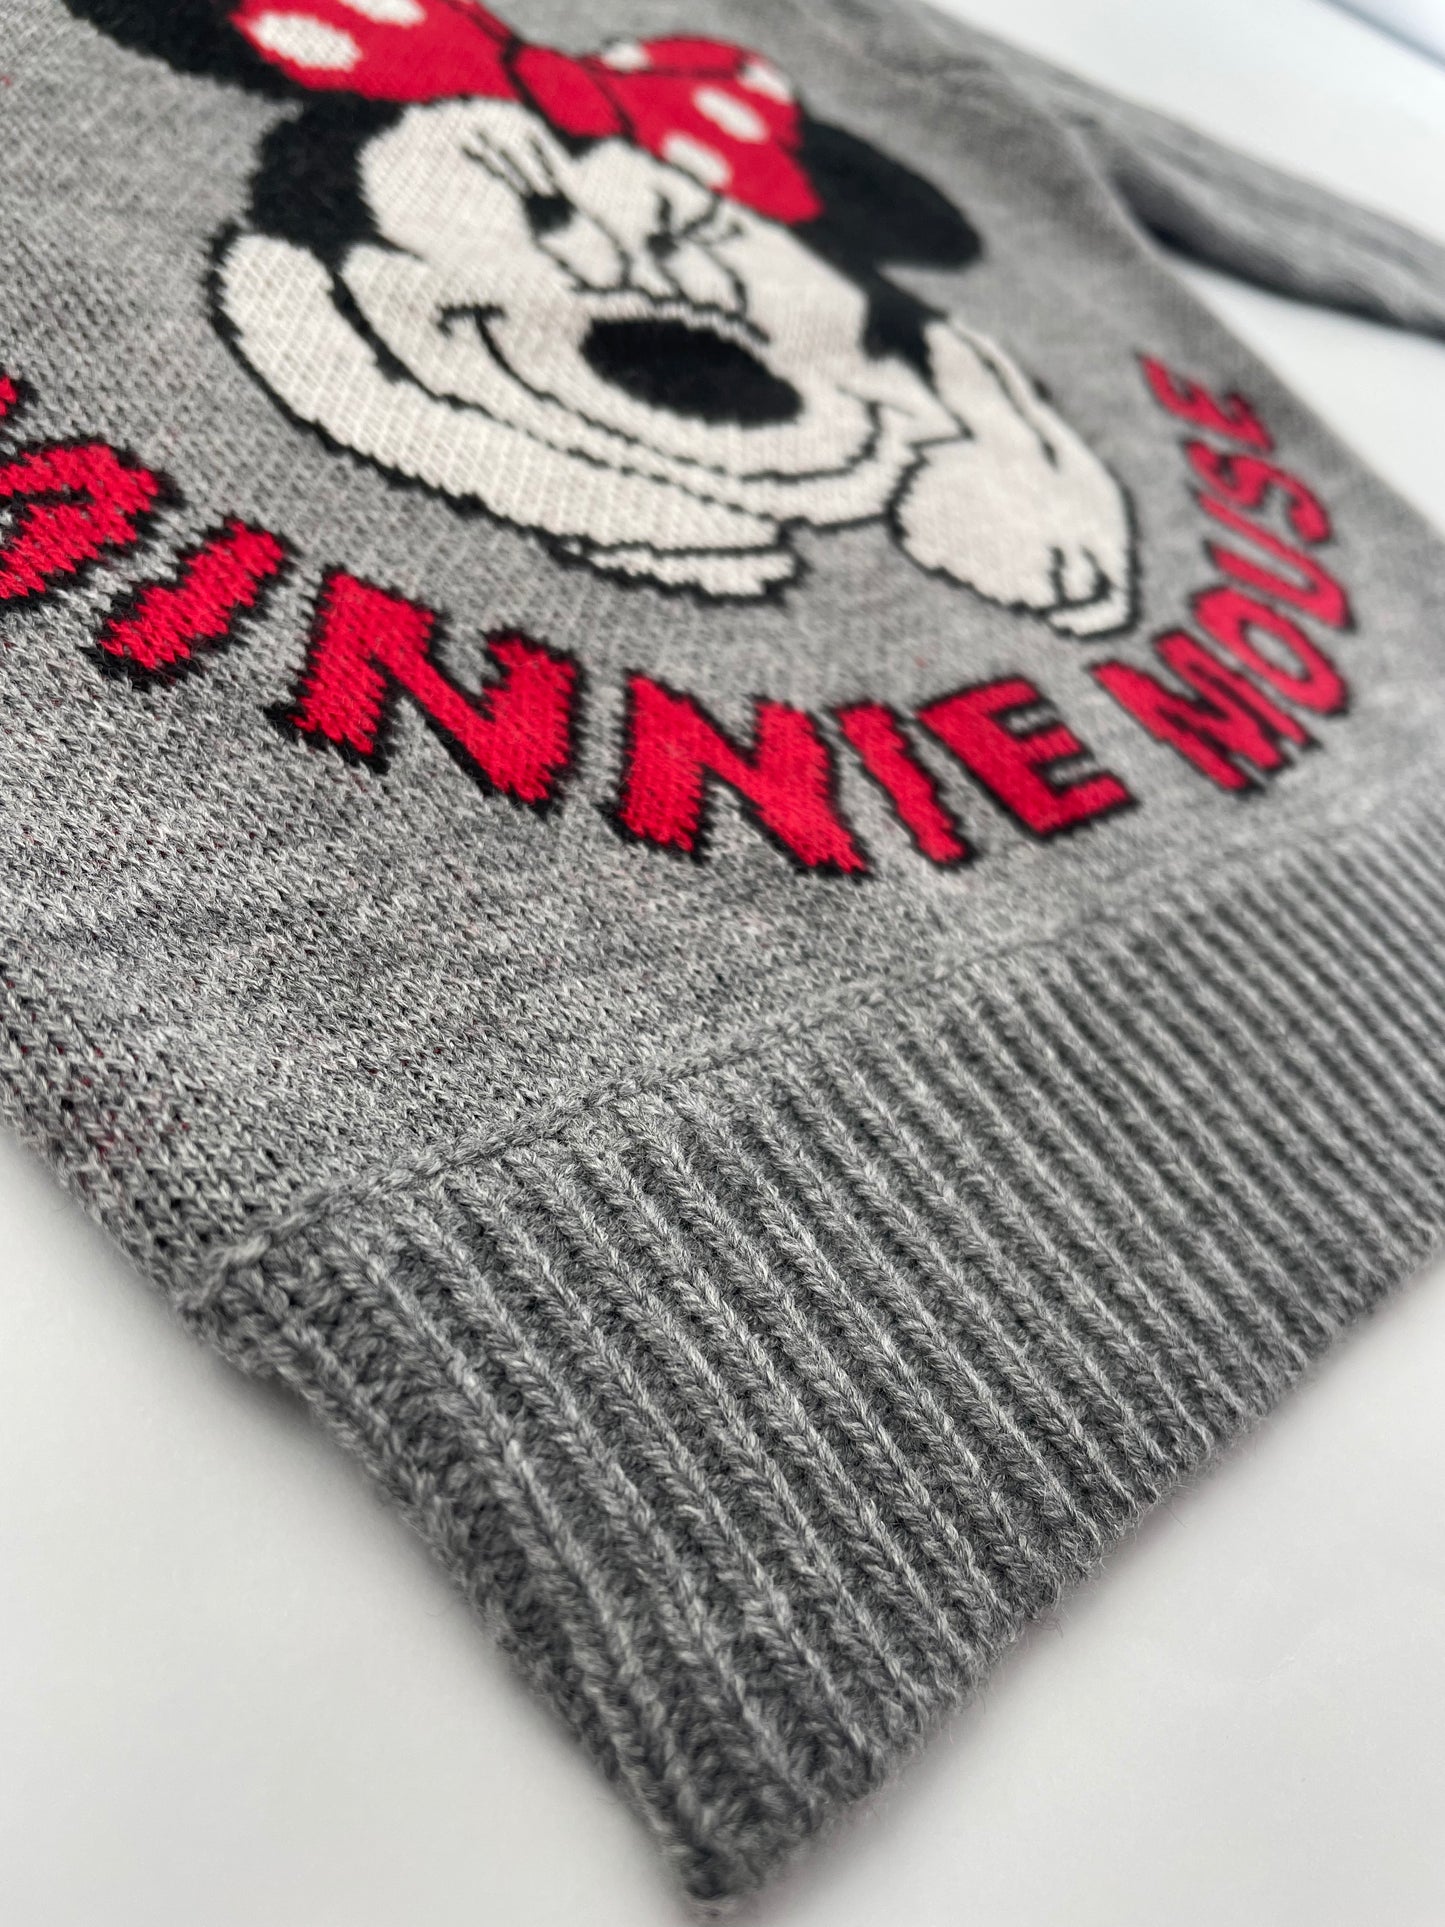 Minnie Mouse Knitted Sweater